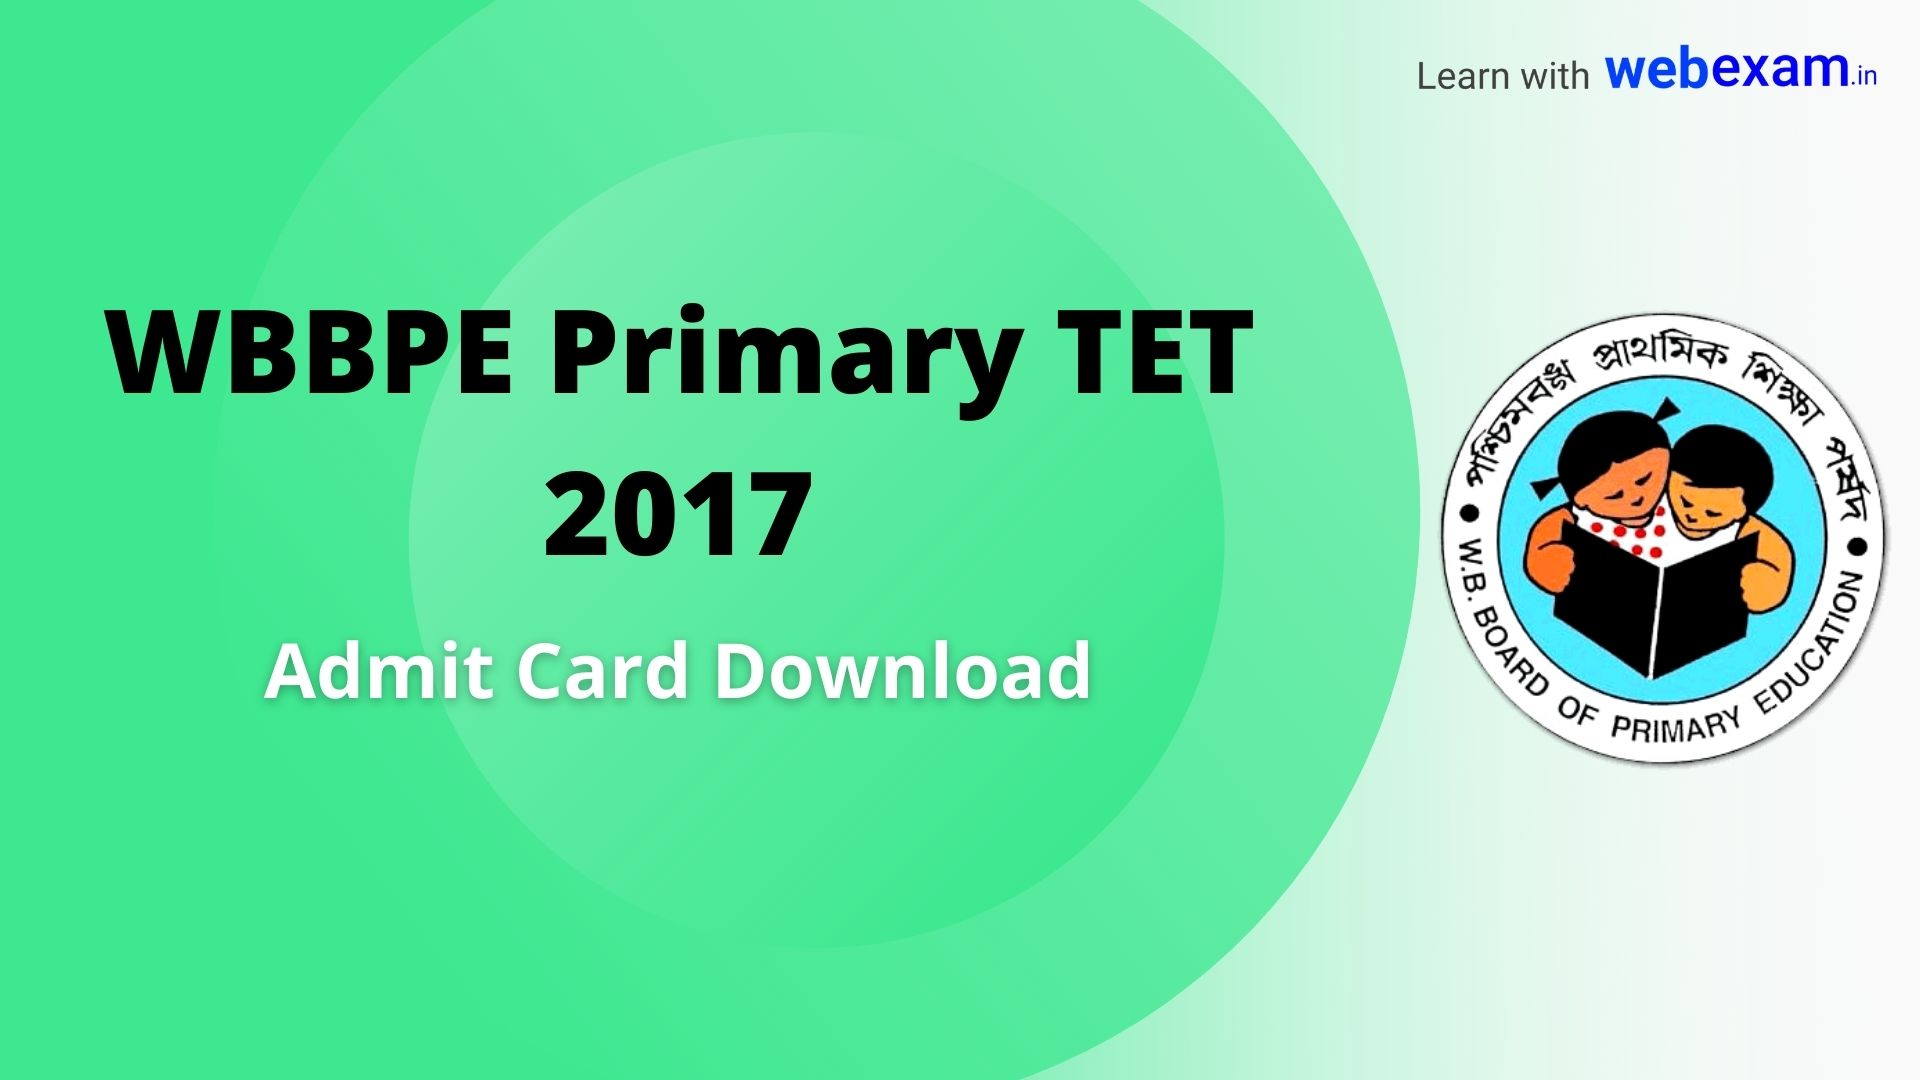 WBBPE Primary TET 2017 Admit Card Download - wbbpe.org